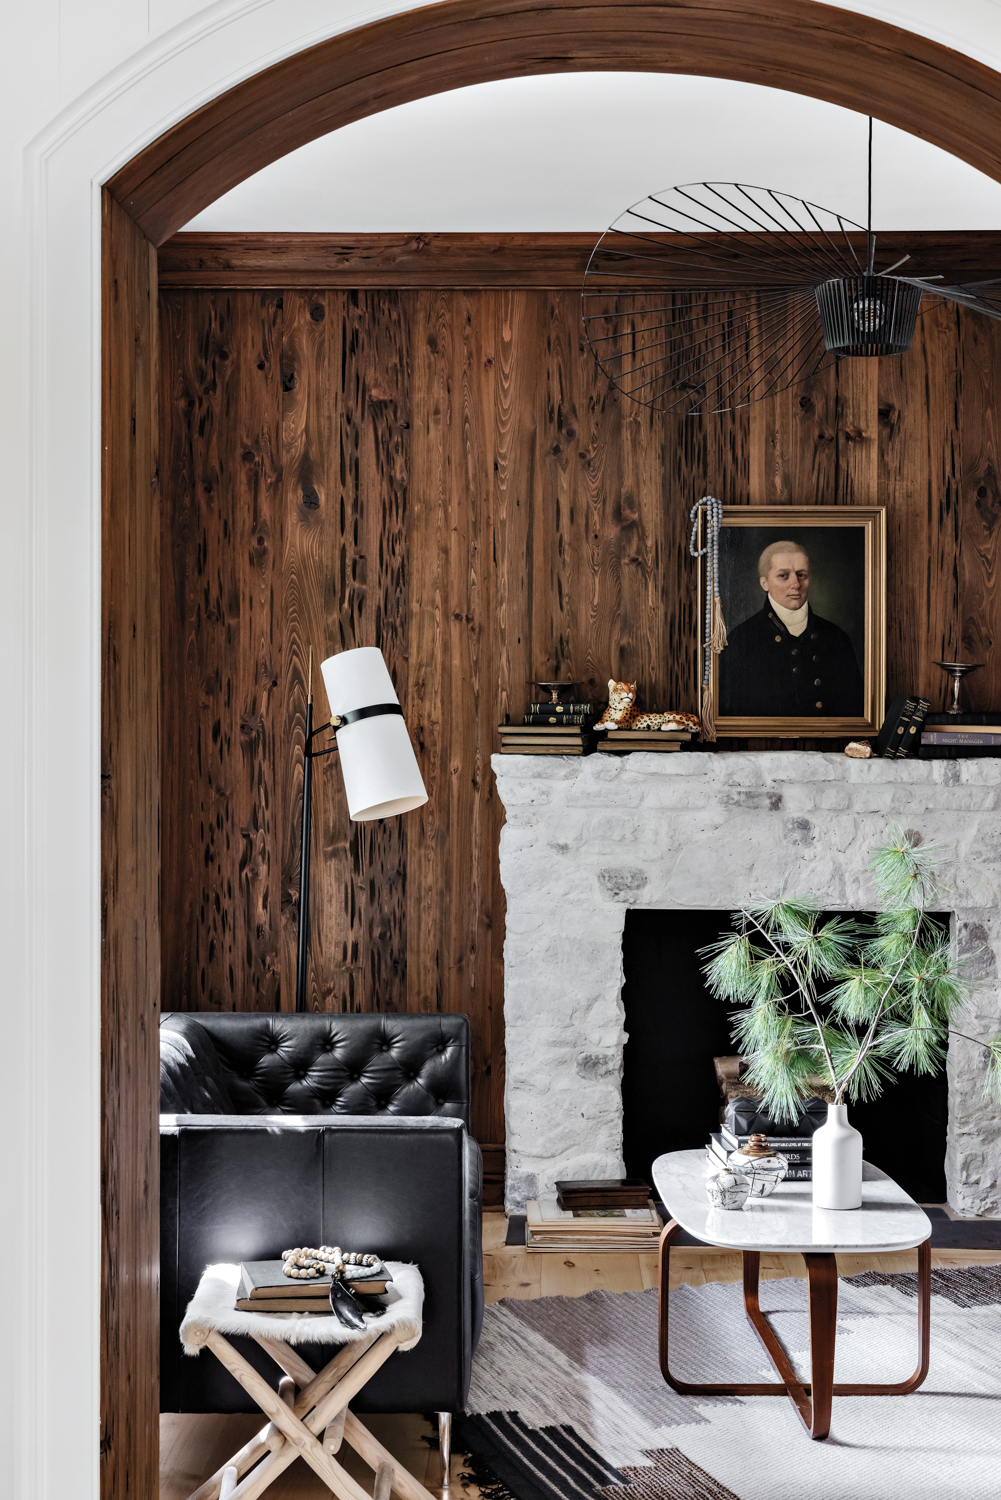 Dark wood wall paneling contrasts with white-washed stone fireplace and accented by a black-leather sofa